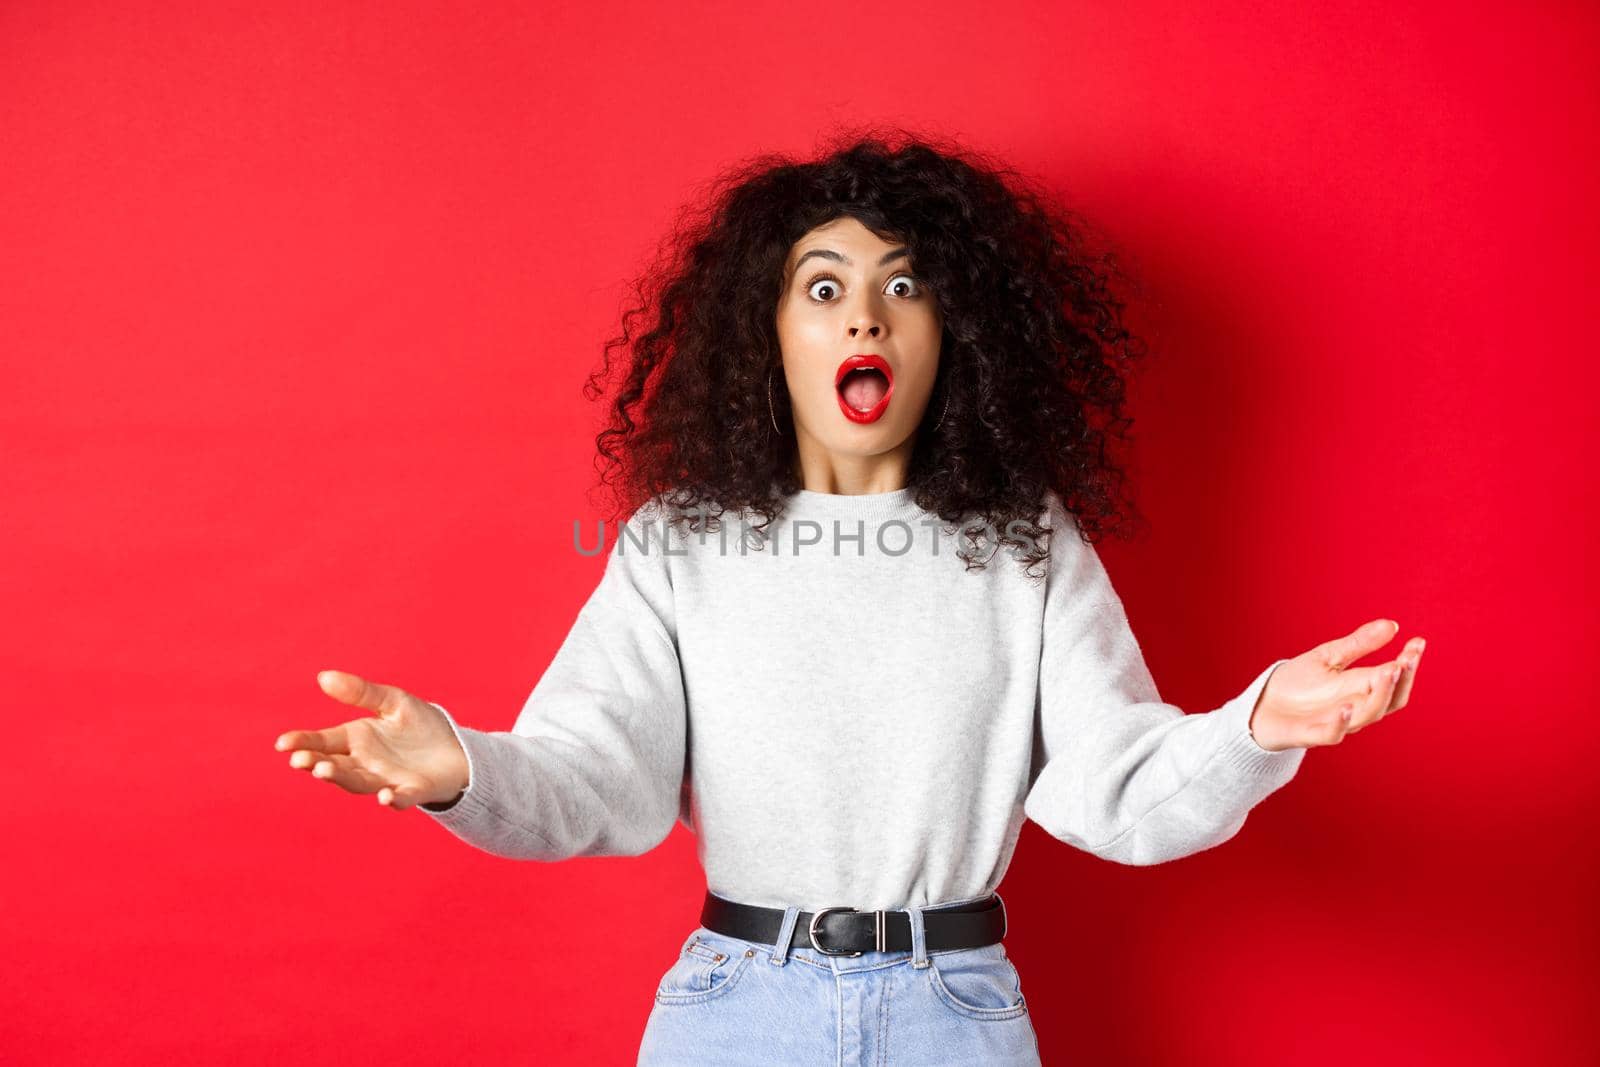 Beautiful young woman standing in awe, drop jaw and looking impressed at camera, spread hands sideways with disbelief, standing on red background.